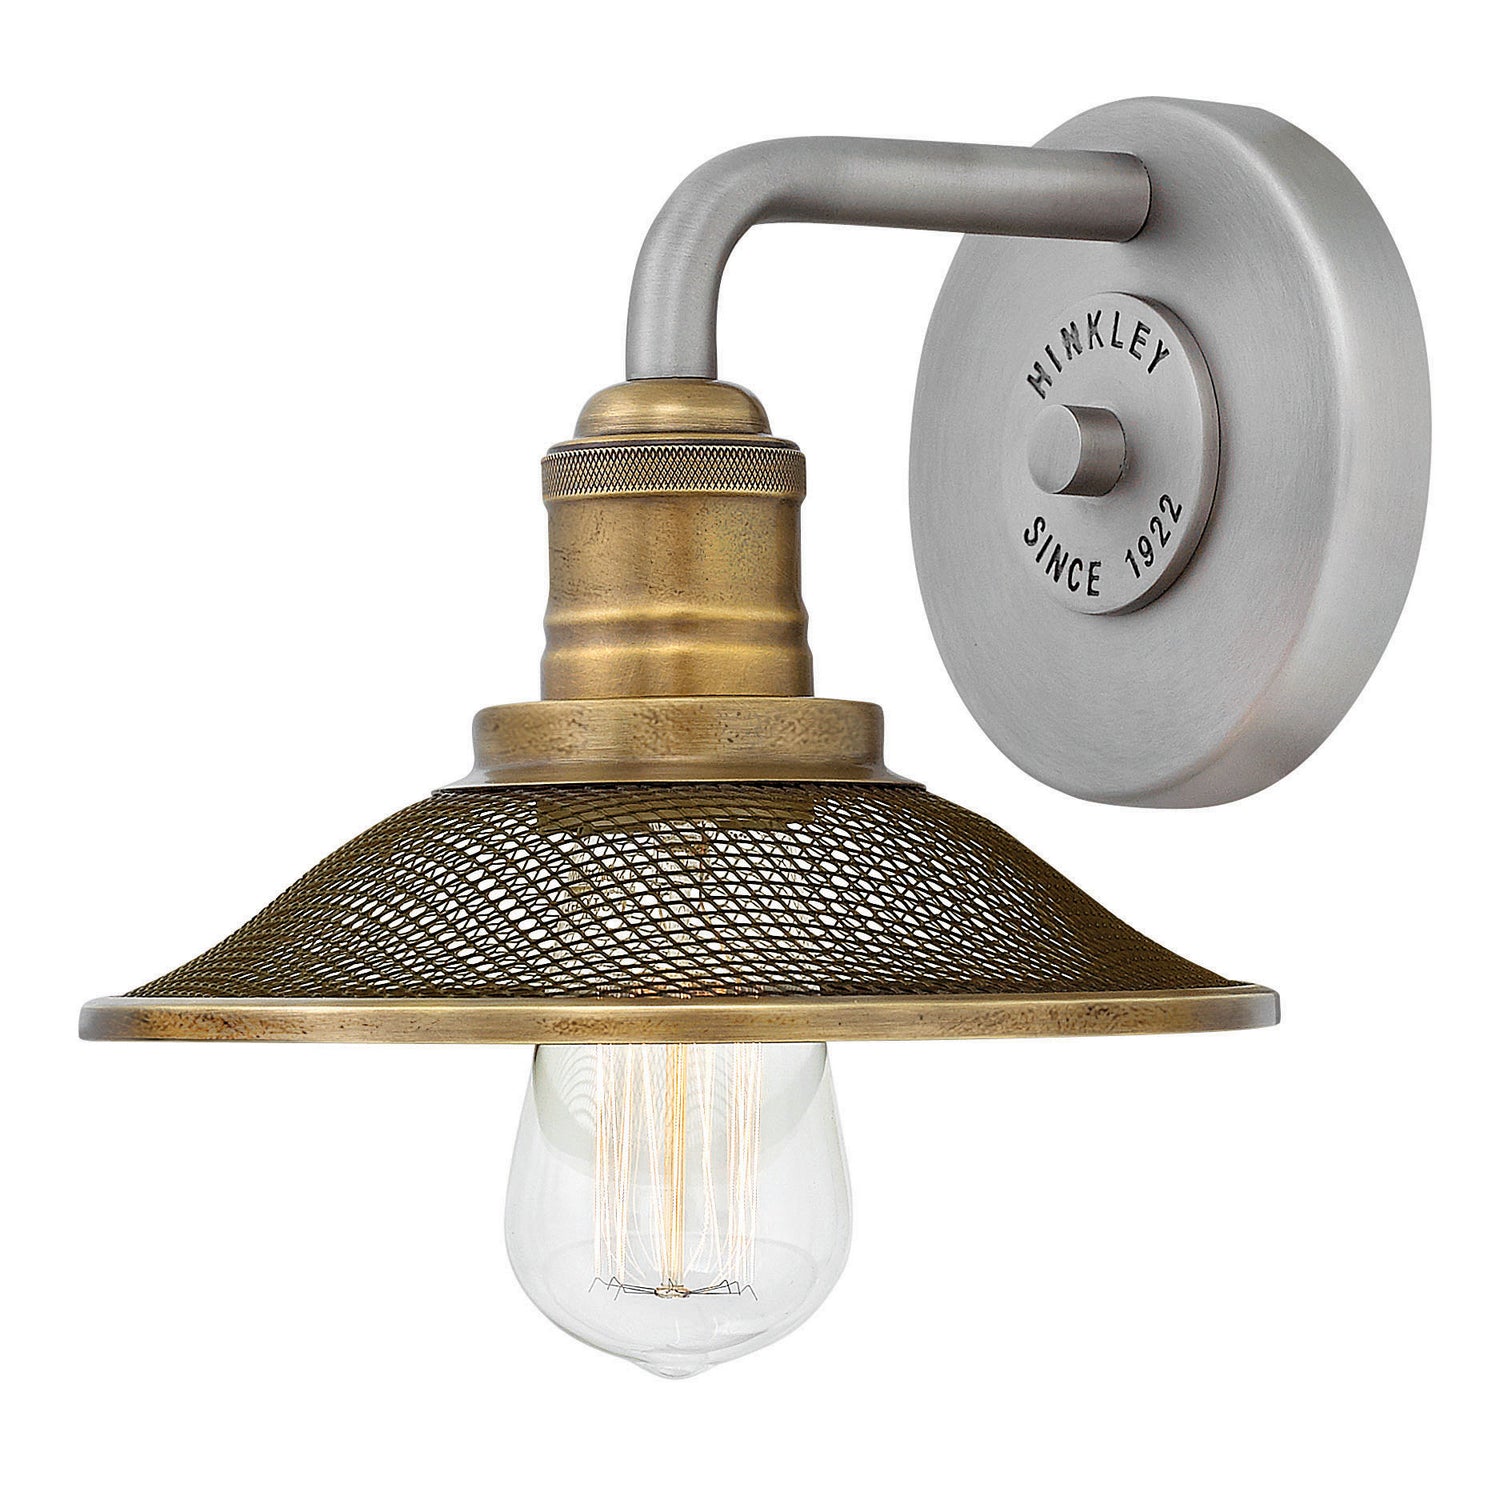 Hinkley - 5290AN - LED Bath Sconce - Rigby - Antique Nickel